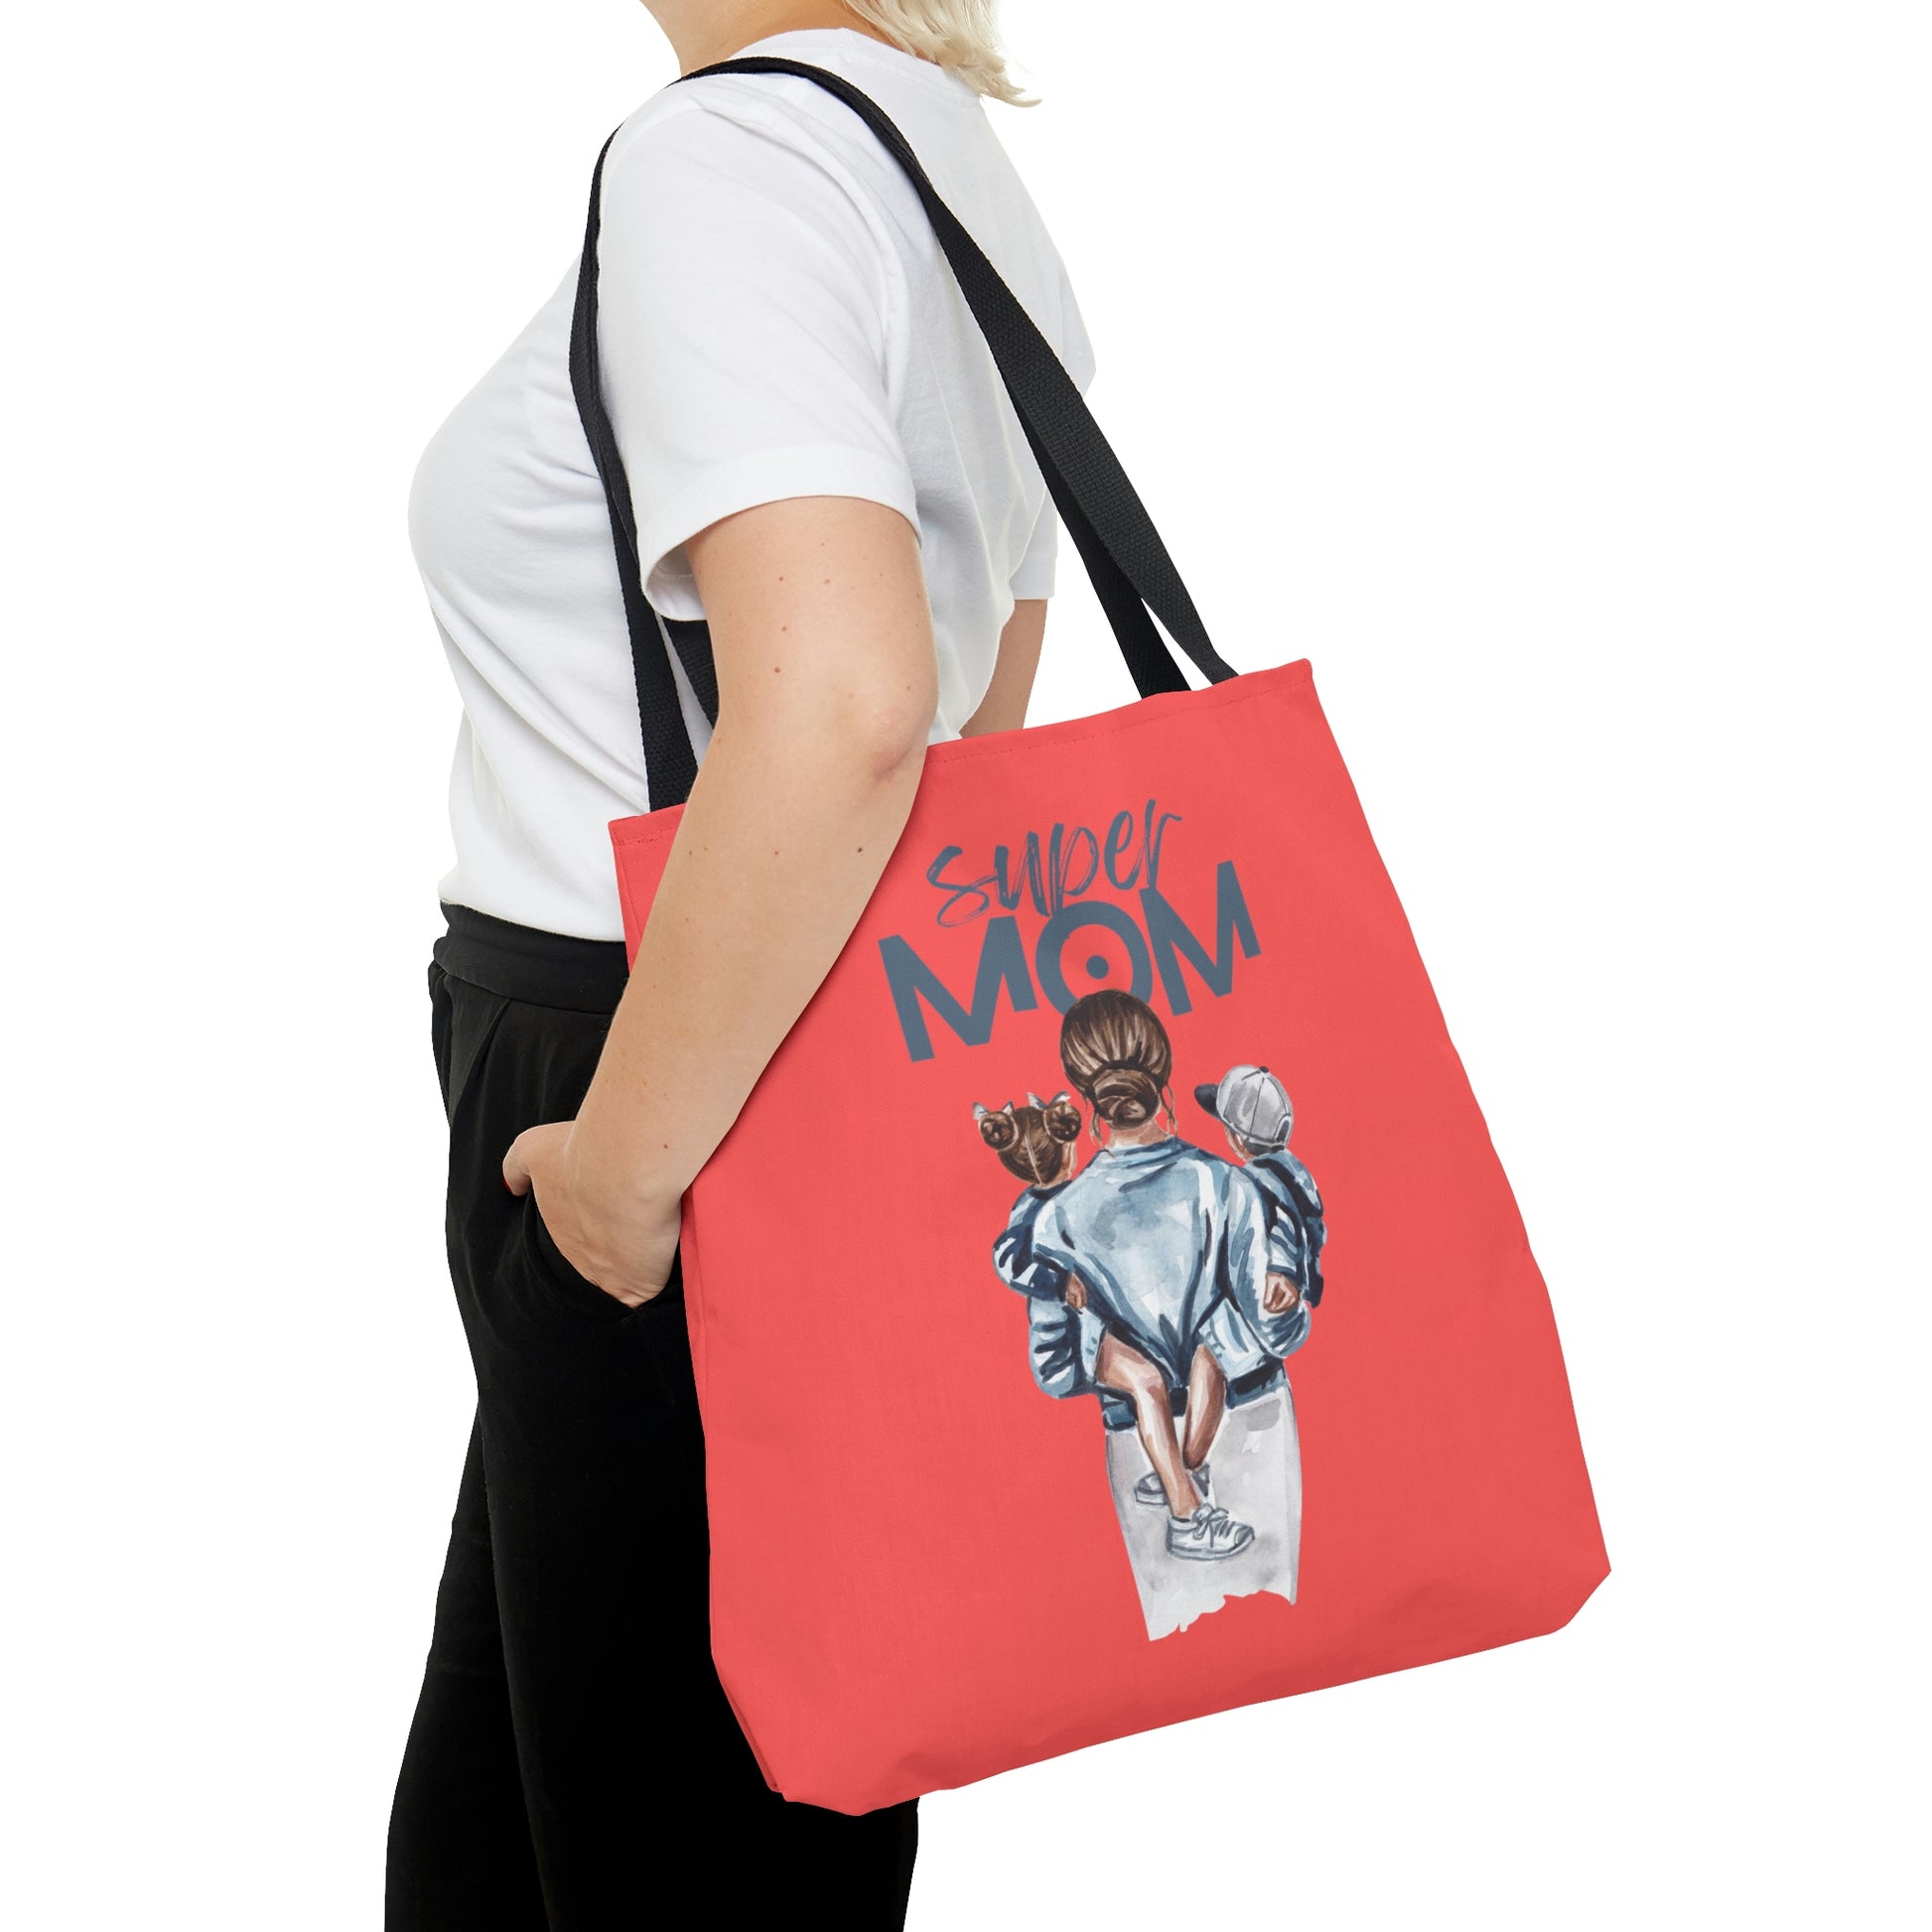 Super Mom AOP Tote Bag | BKLA | Shoes & Accessories | shoes, hats, phone covers, tote bags, clutch bags